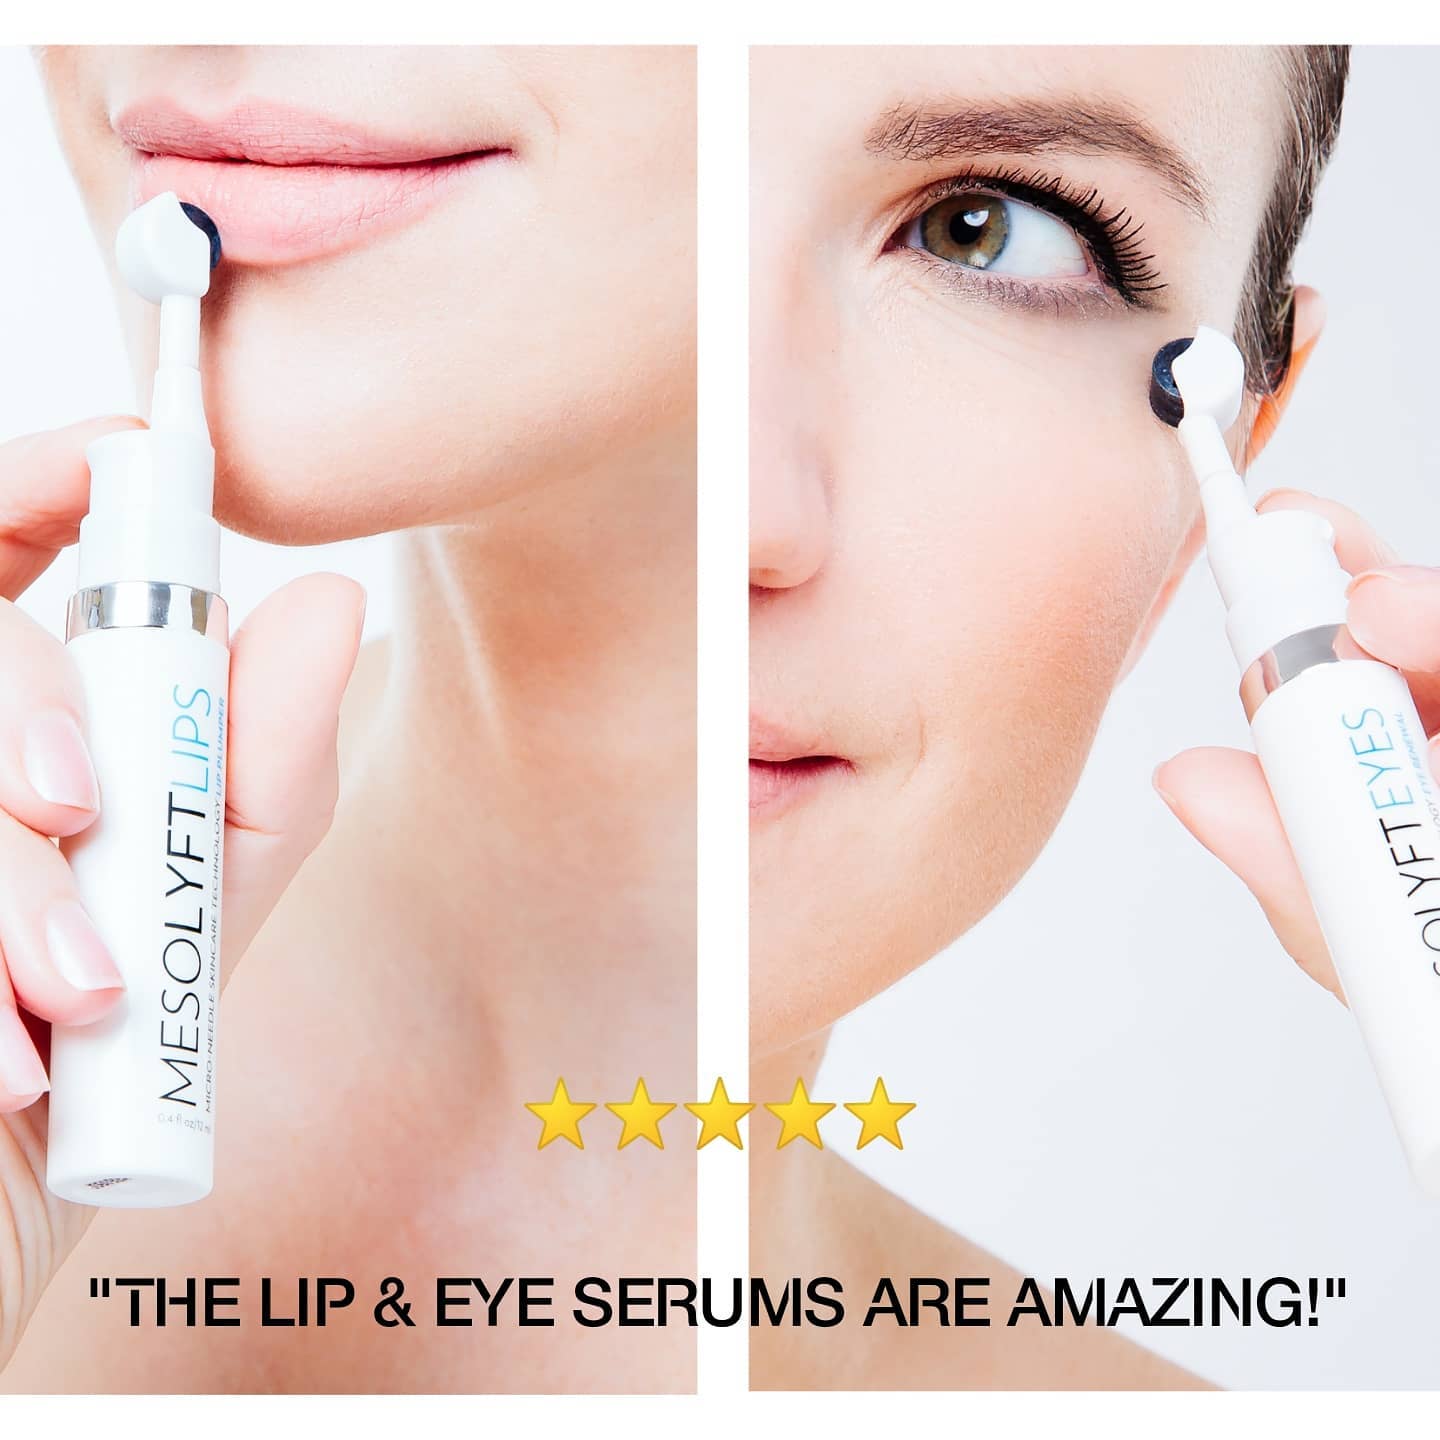 A Life Changing Eyelid Cream In As A Device